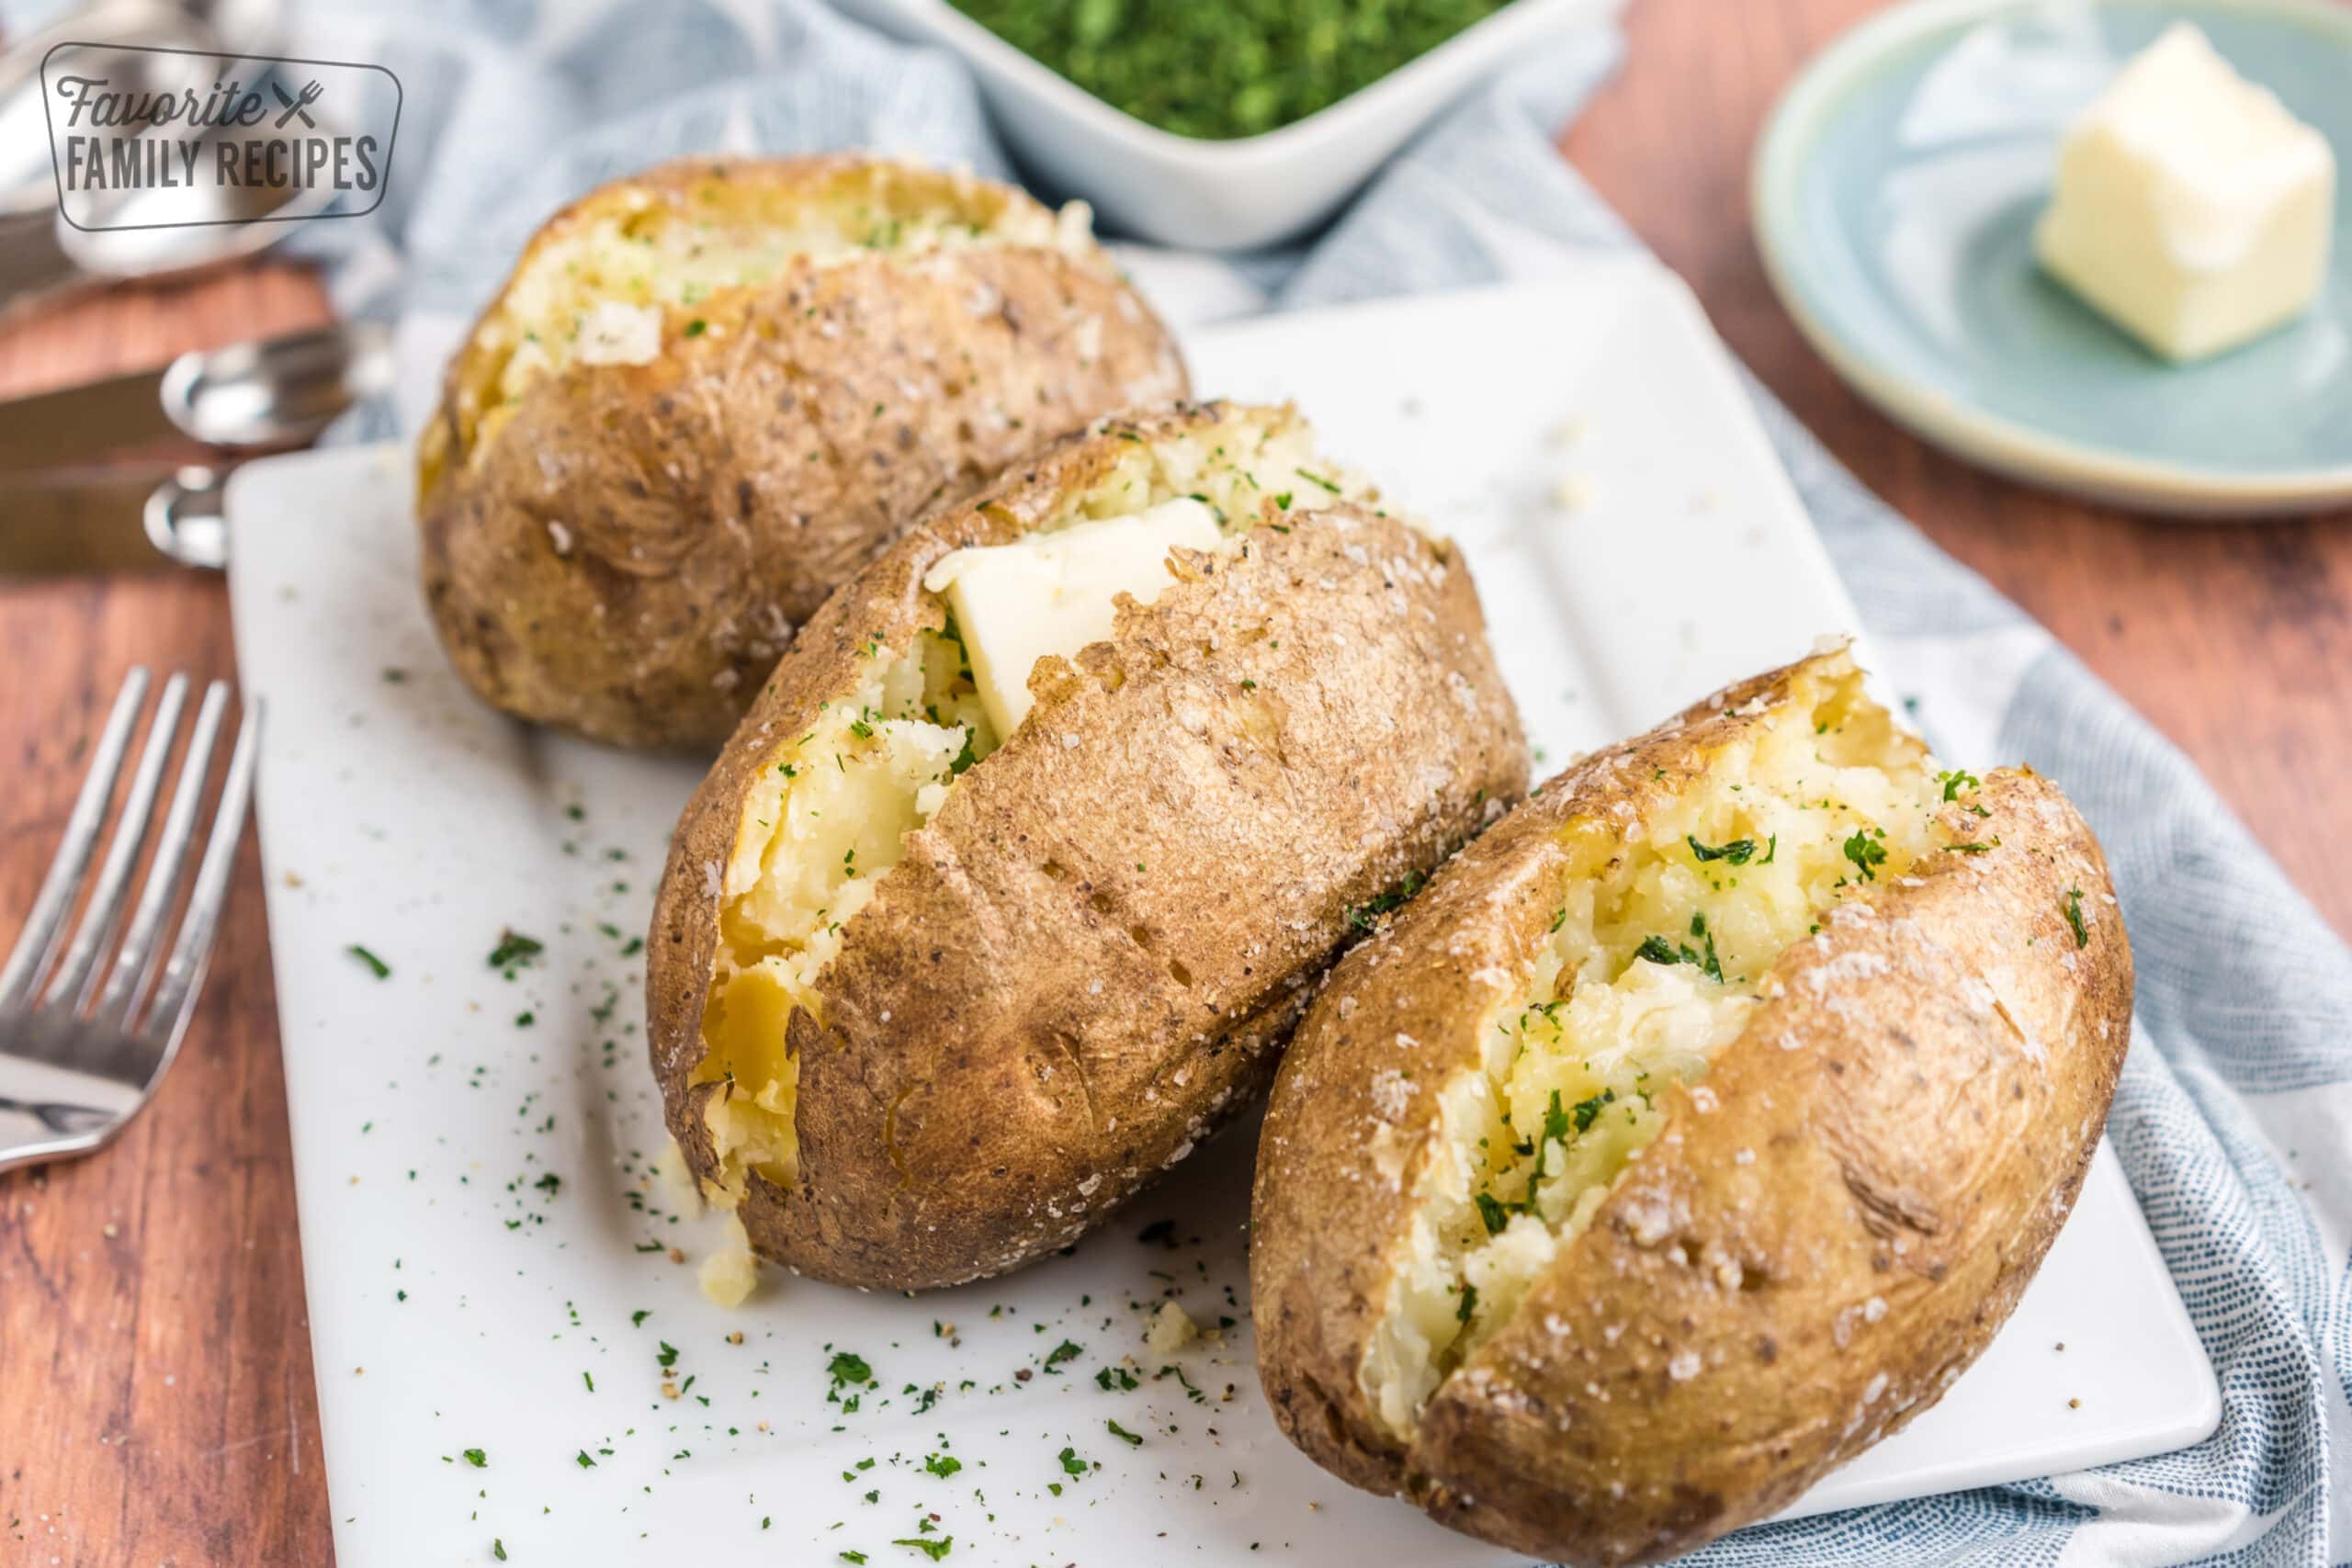 Three baked potatoes on a plate with butter and herbs